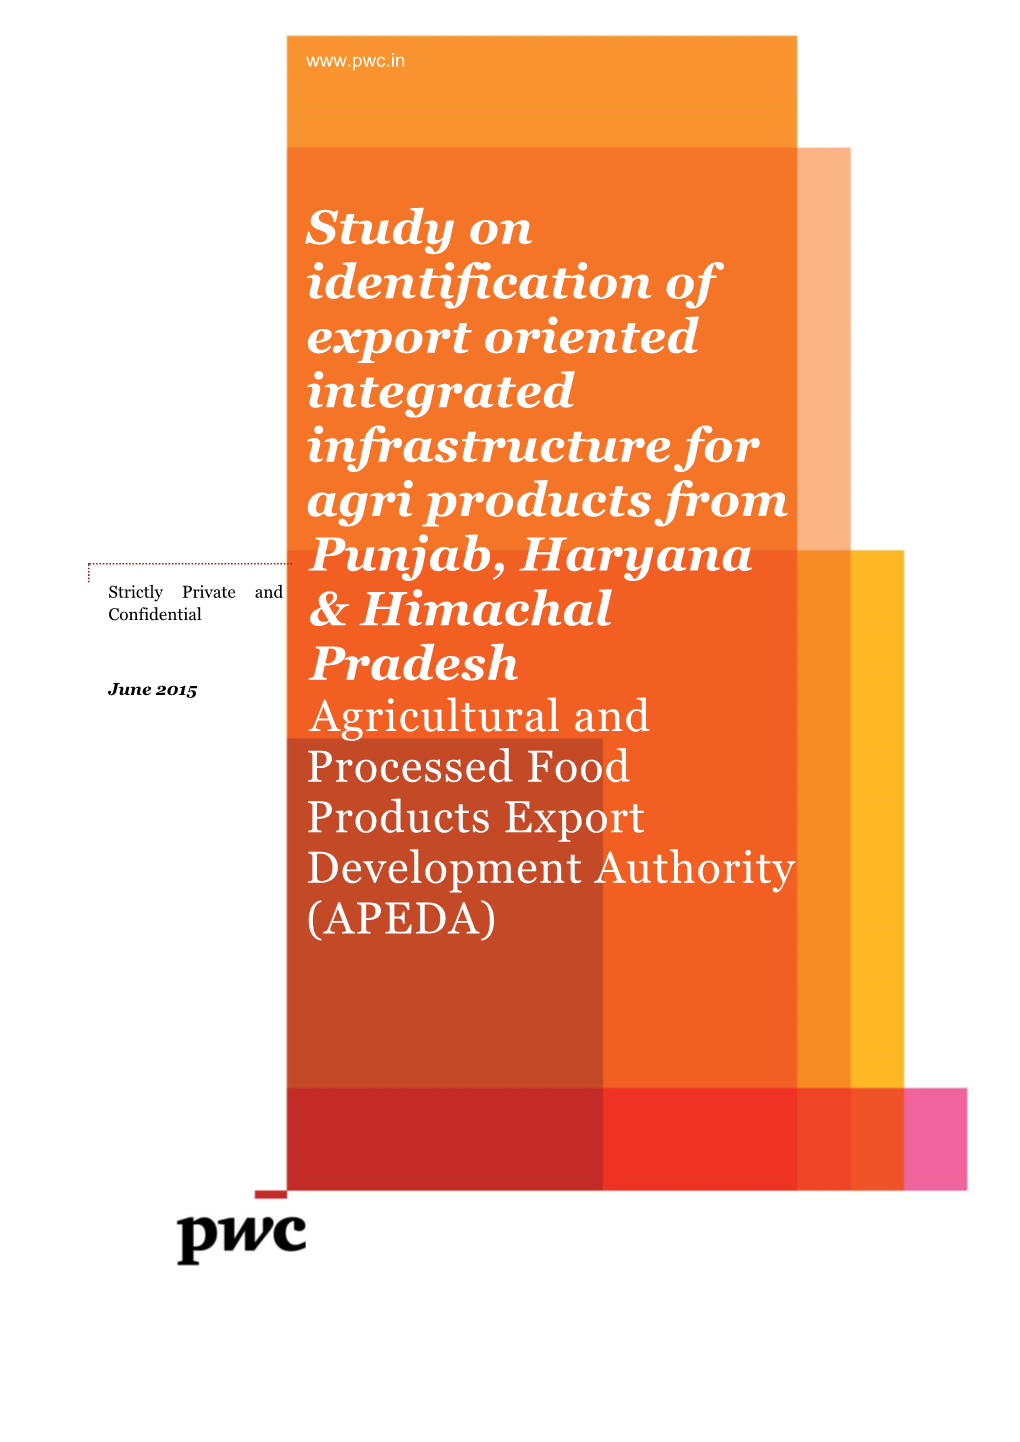 PWC Study on Identification of Export Oriented Integrated Infrastructure For